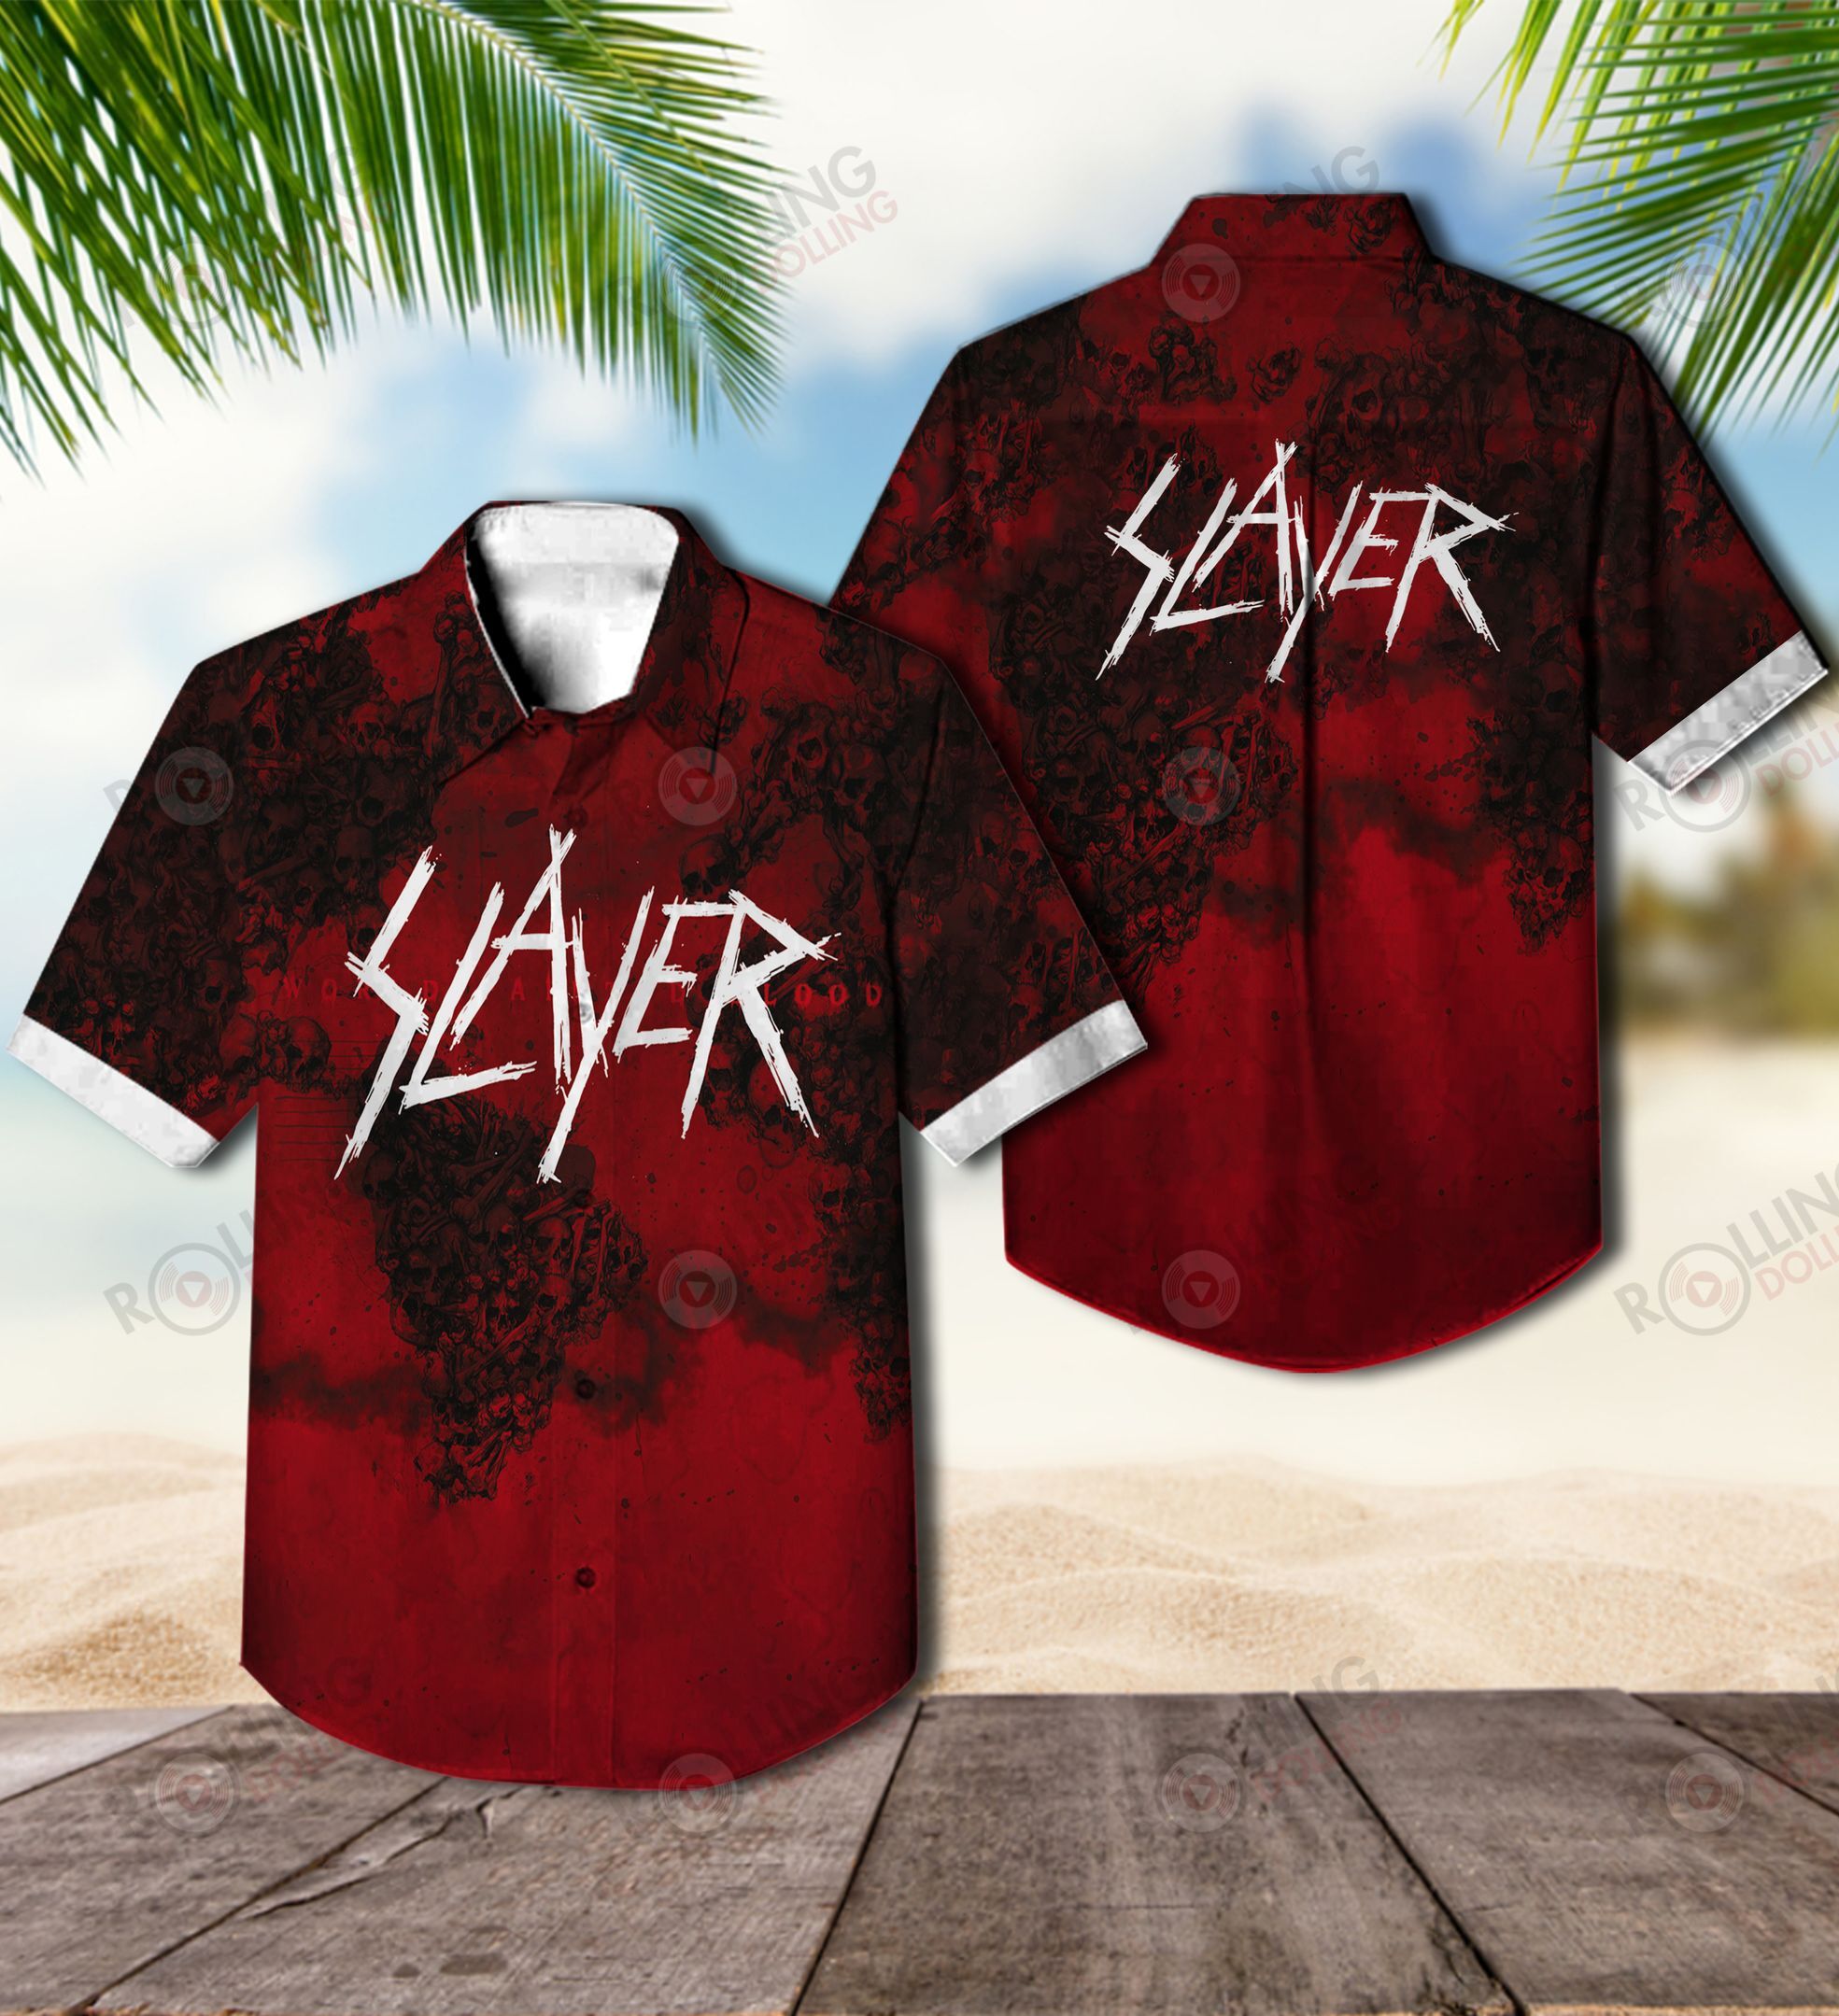 This would make a great gift for any fan who loves Hawaiian Shirt as well as Rock band 16